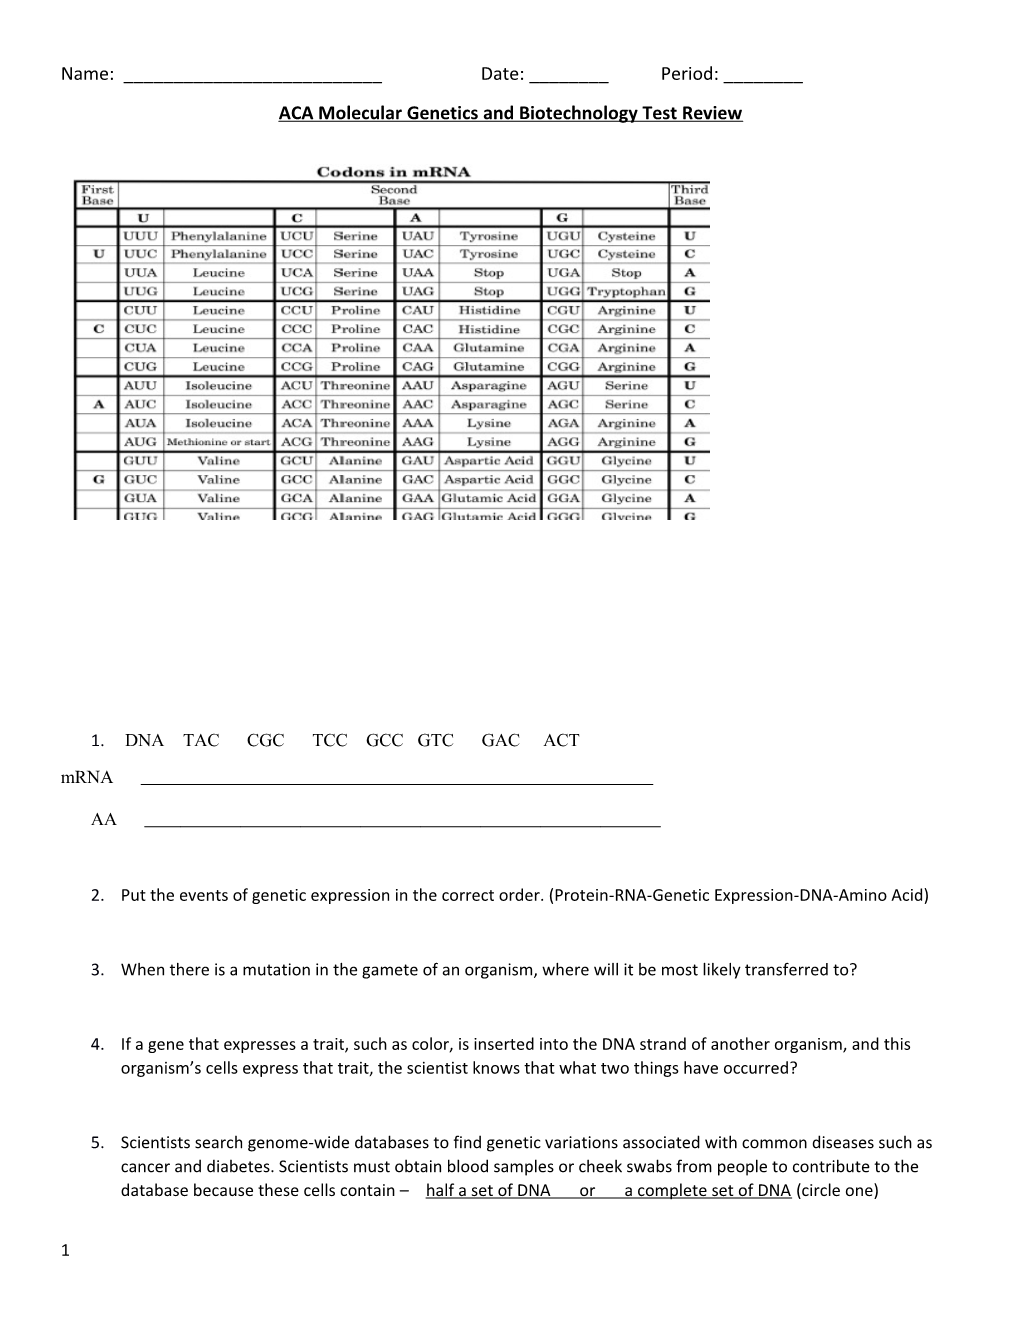 ACA Molecular Genetics and Biotechnology Test Review